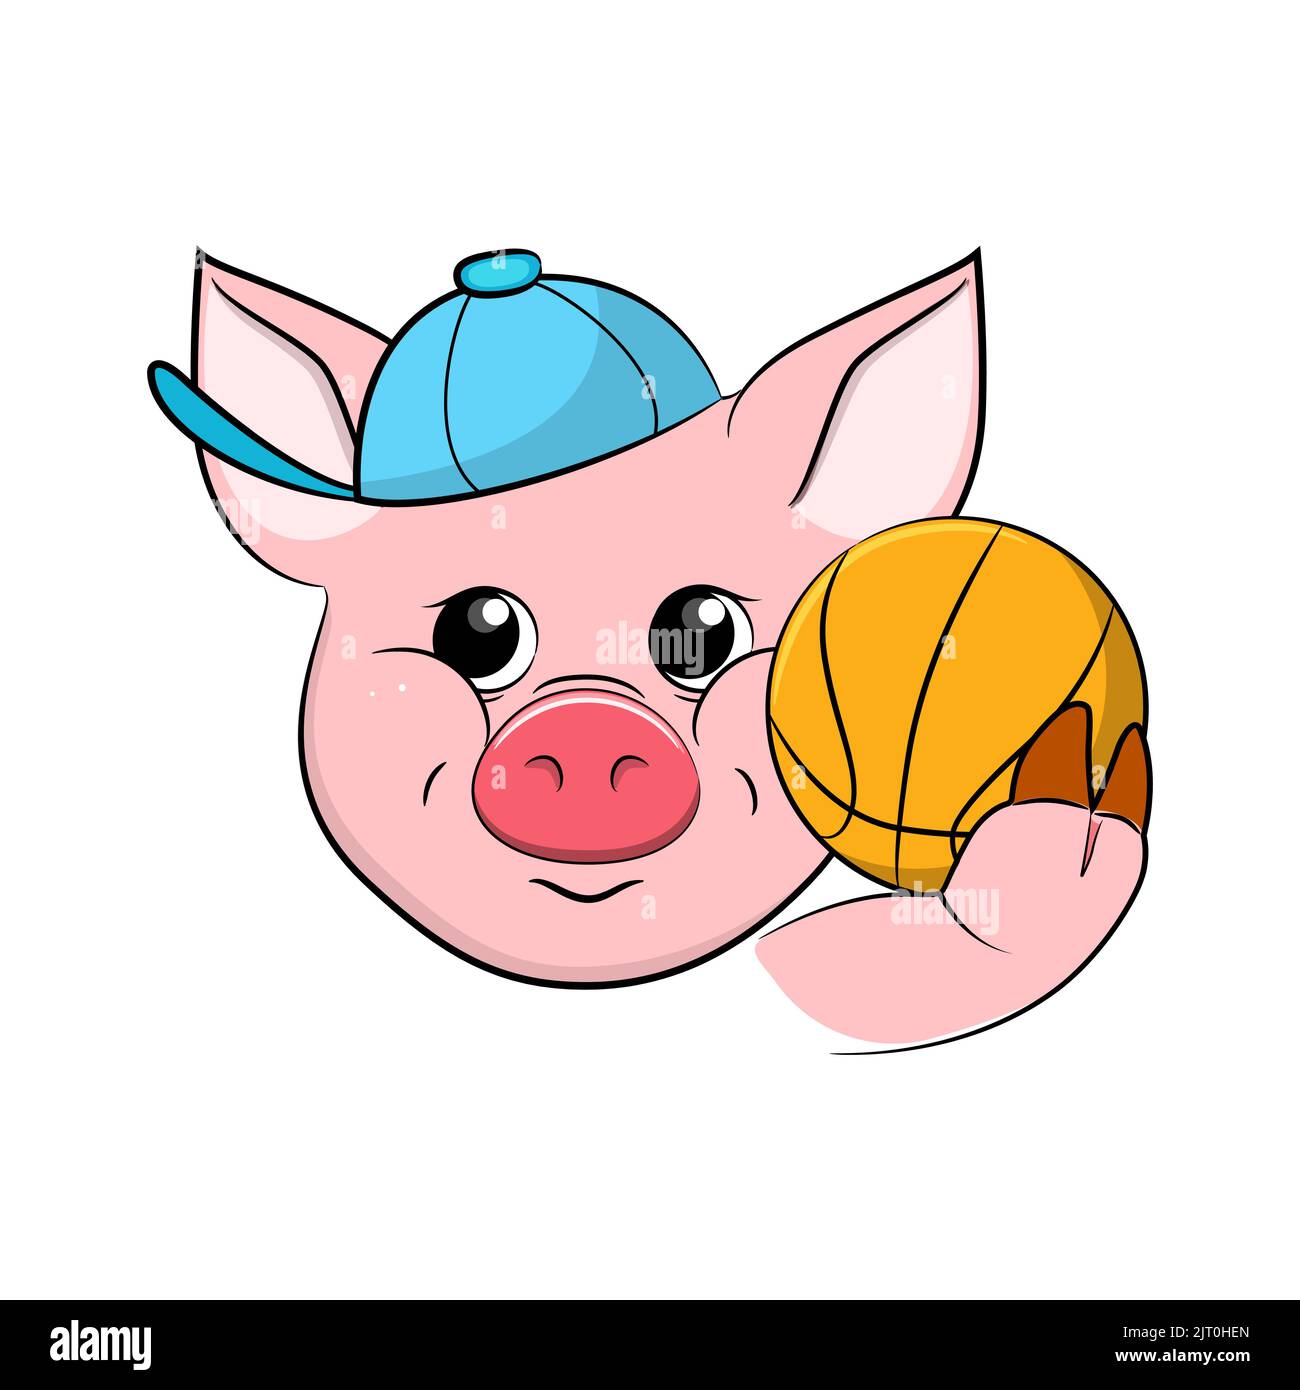 Funny pig Cut Out Stock Images & Pictures - Alamy